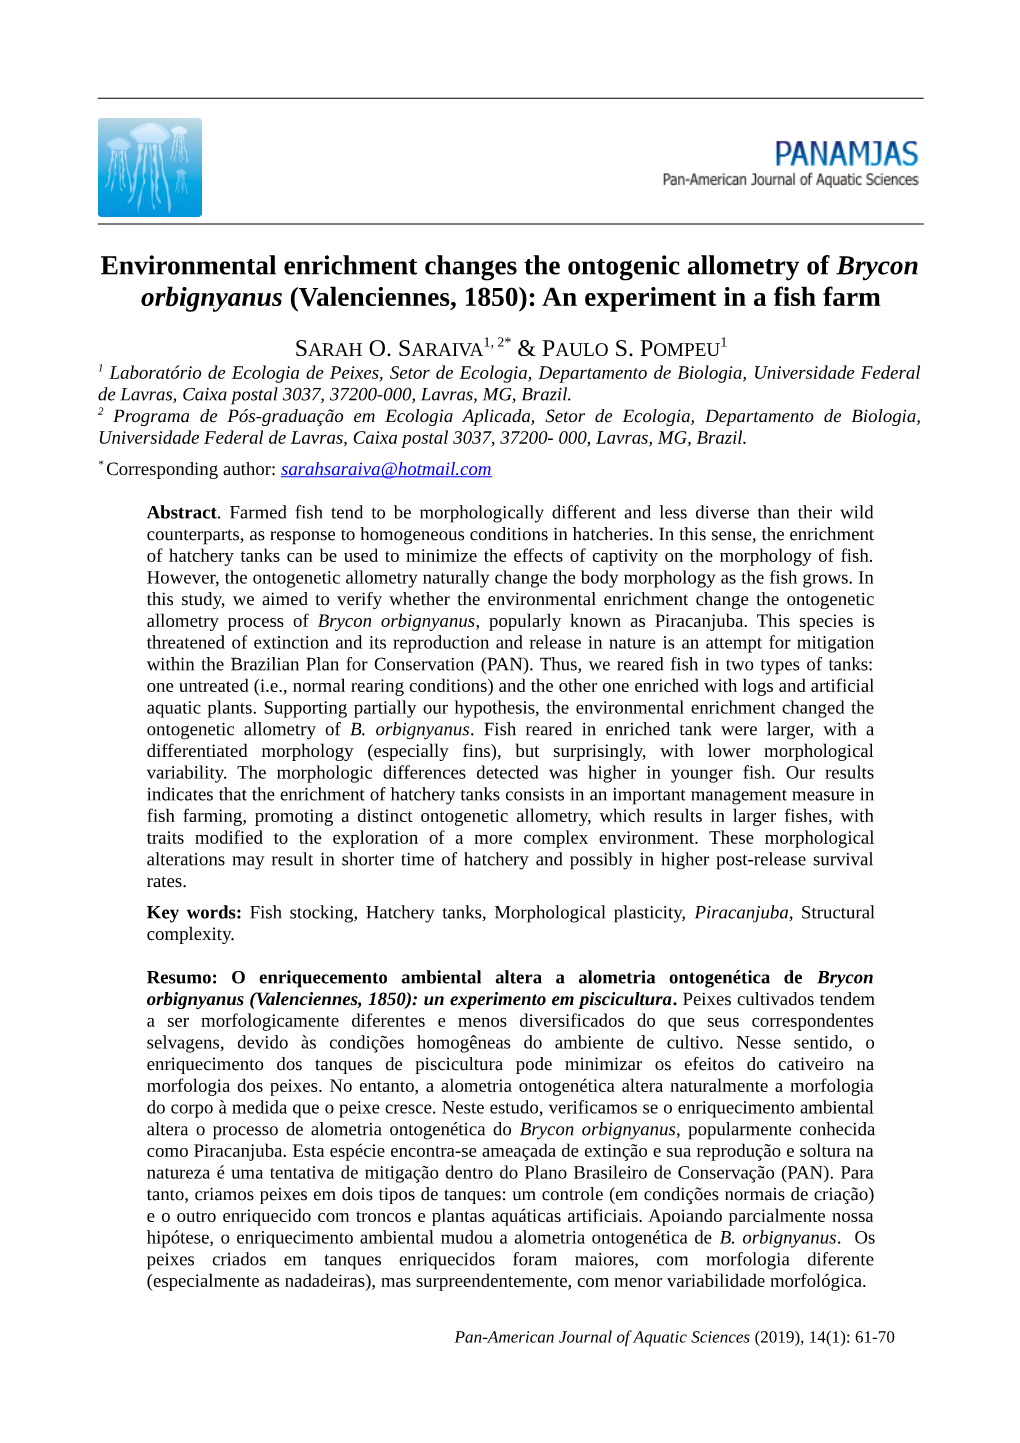 Environmental Enrichment Changes the Ontogenic Allometry of Brycon Orbignyanus (Valenciennes, 1850): an Experiment in a Fish Farm